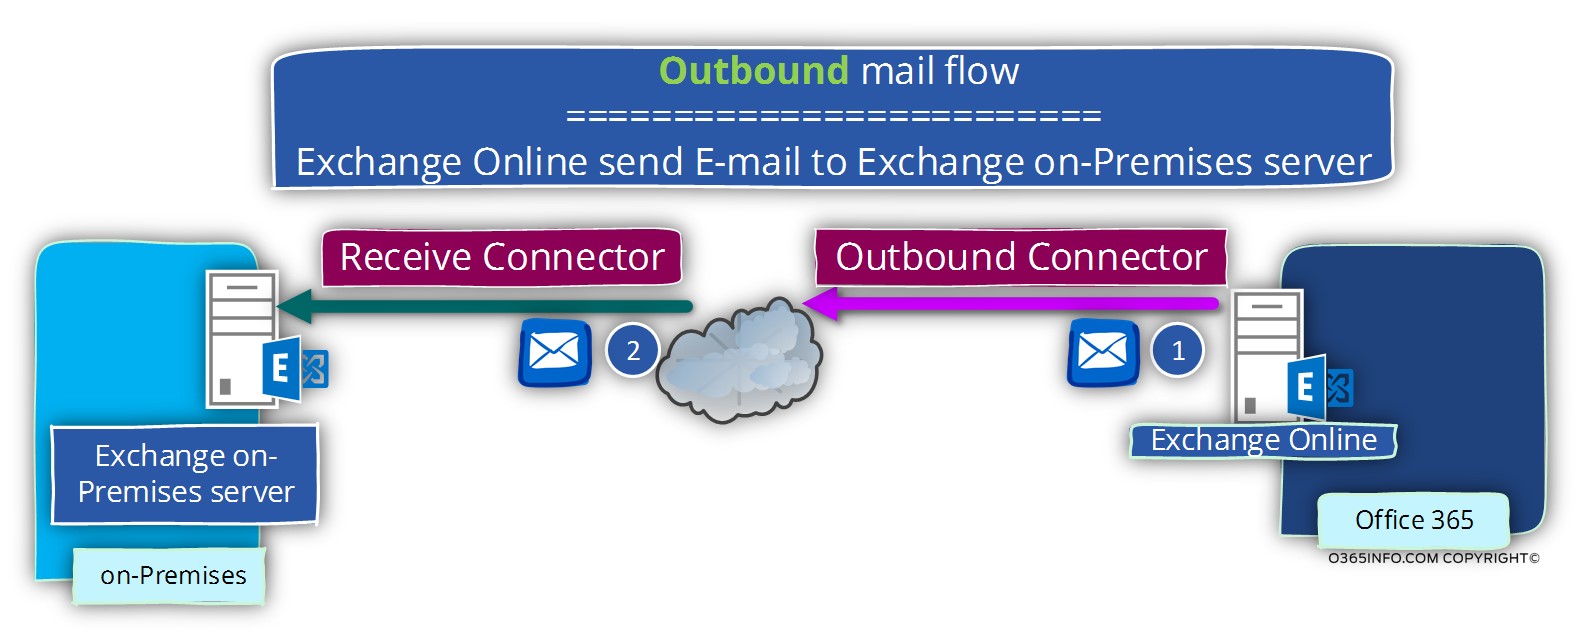 Outbound mail flow -Exchange Online send E-mail to Exchange on-Premises server